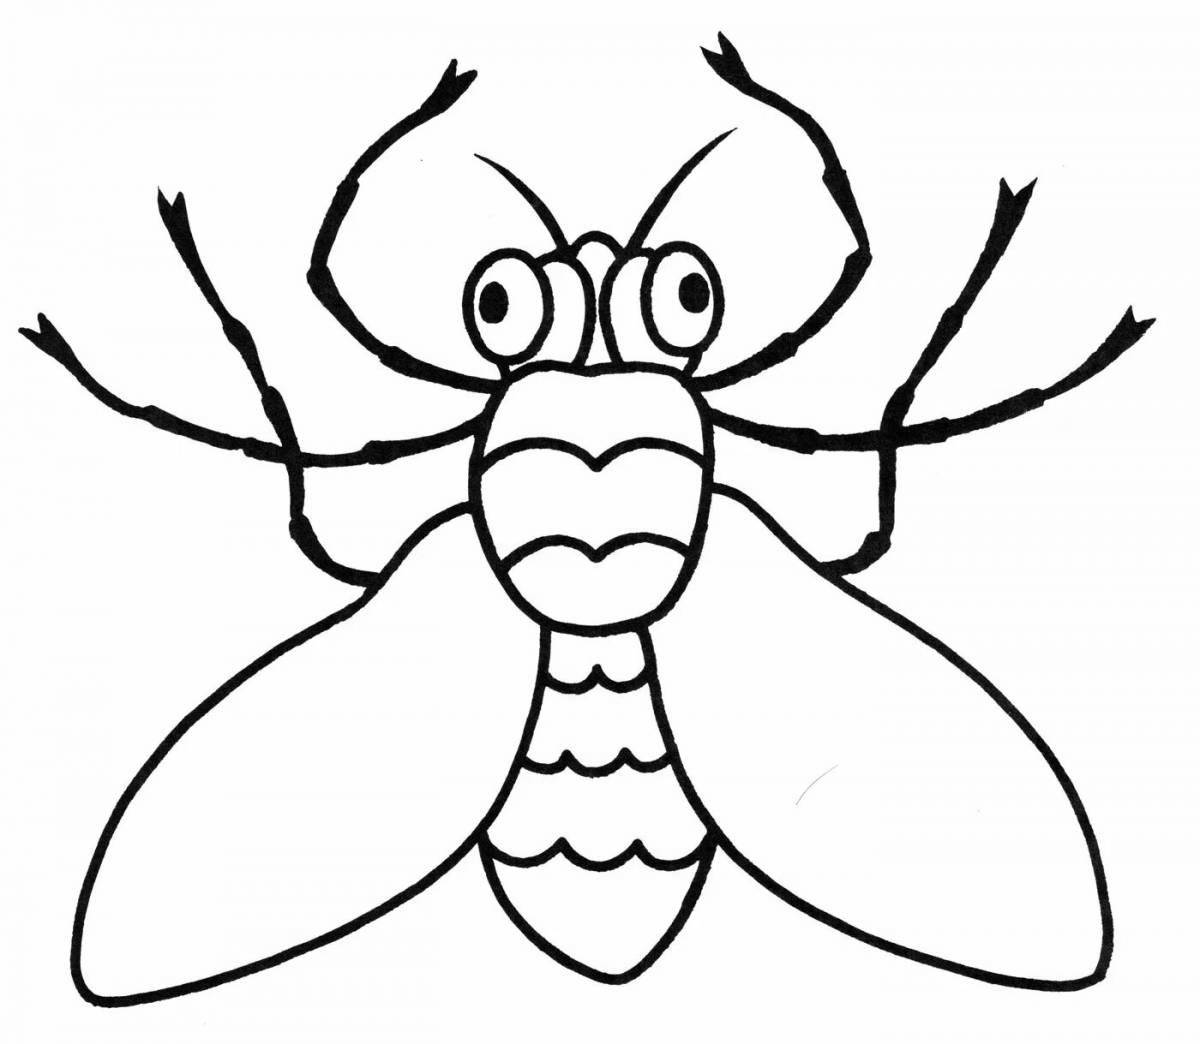 A striking fly coloring page for 3-4 year olds